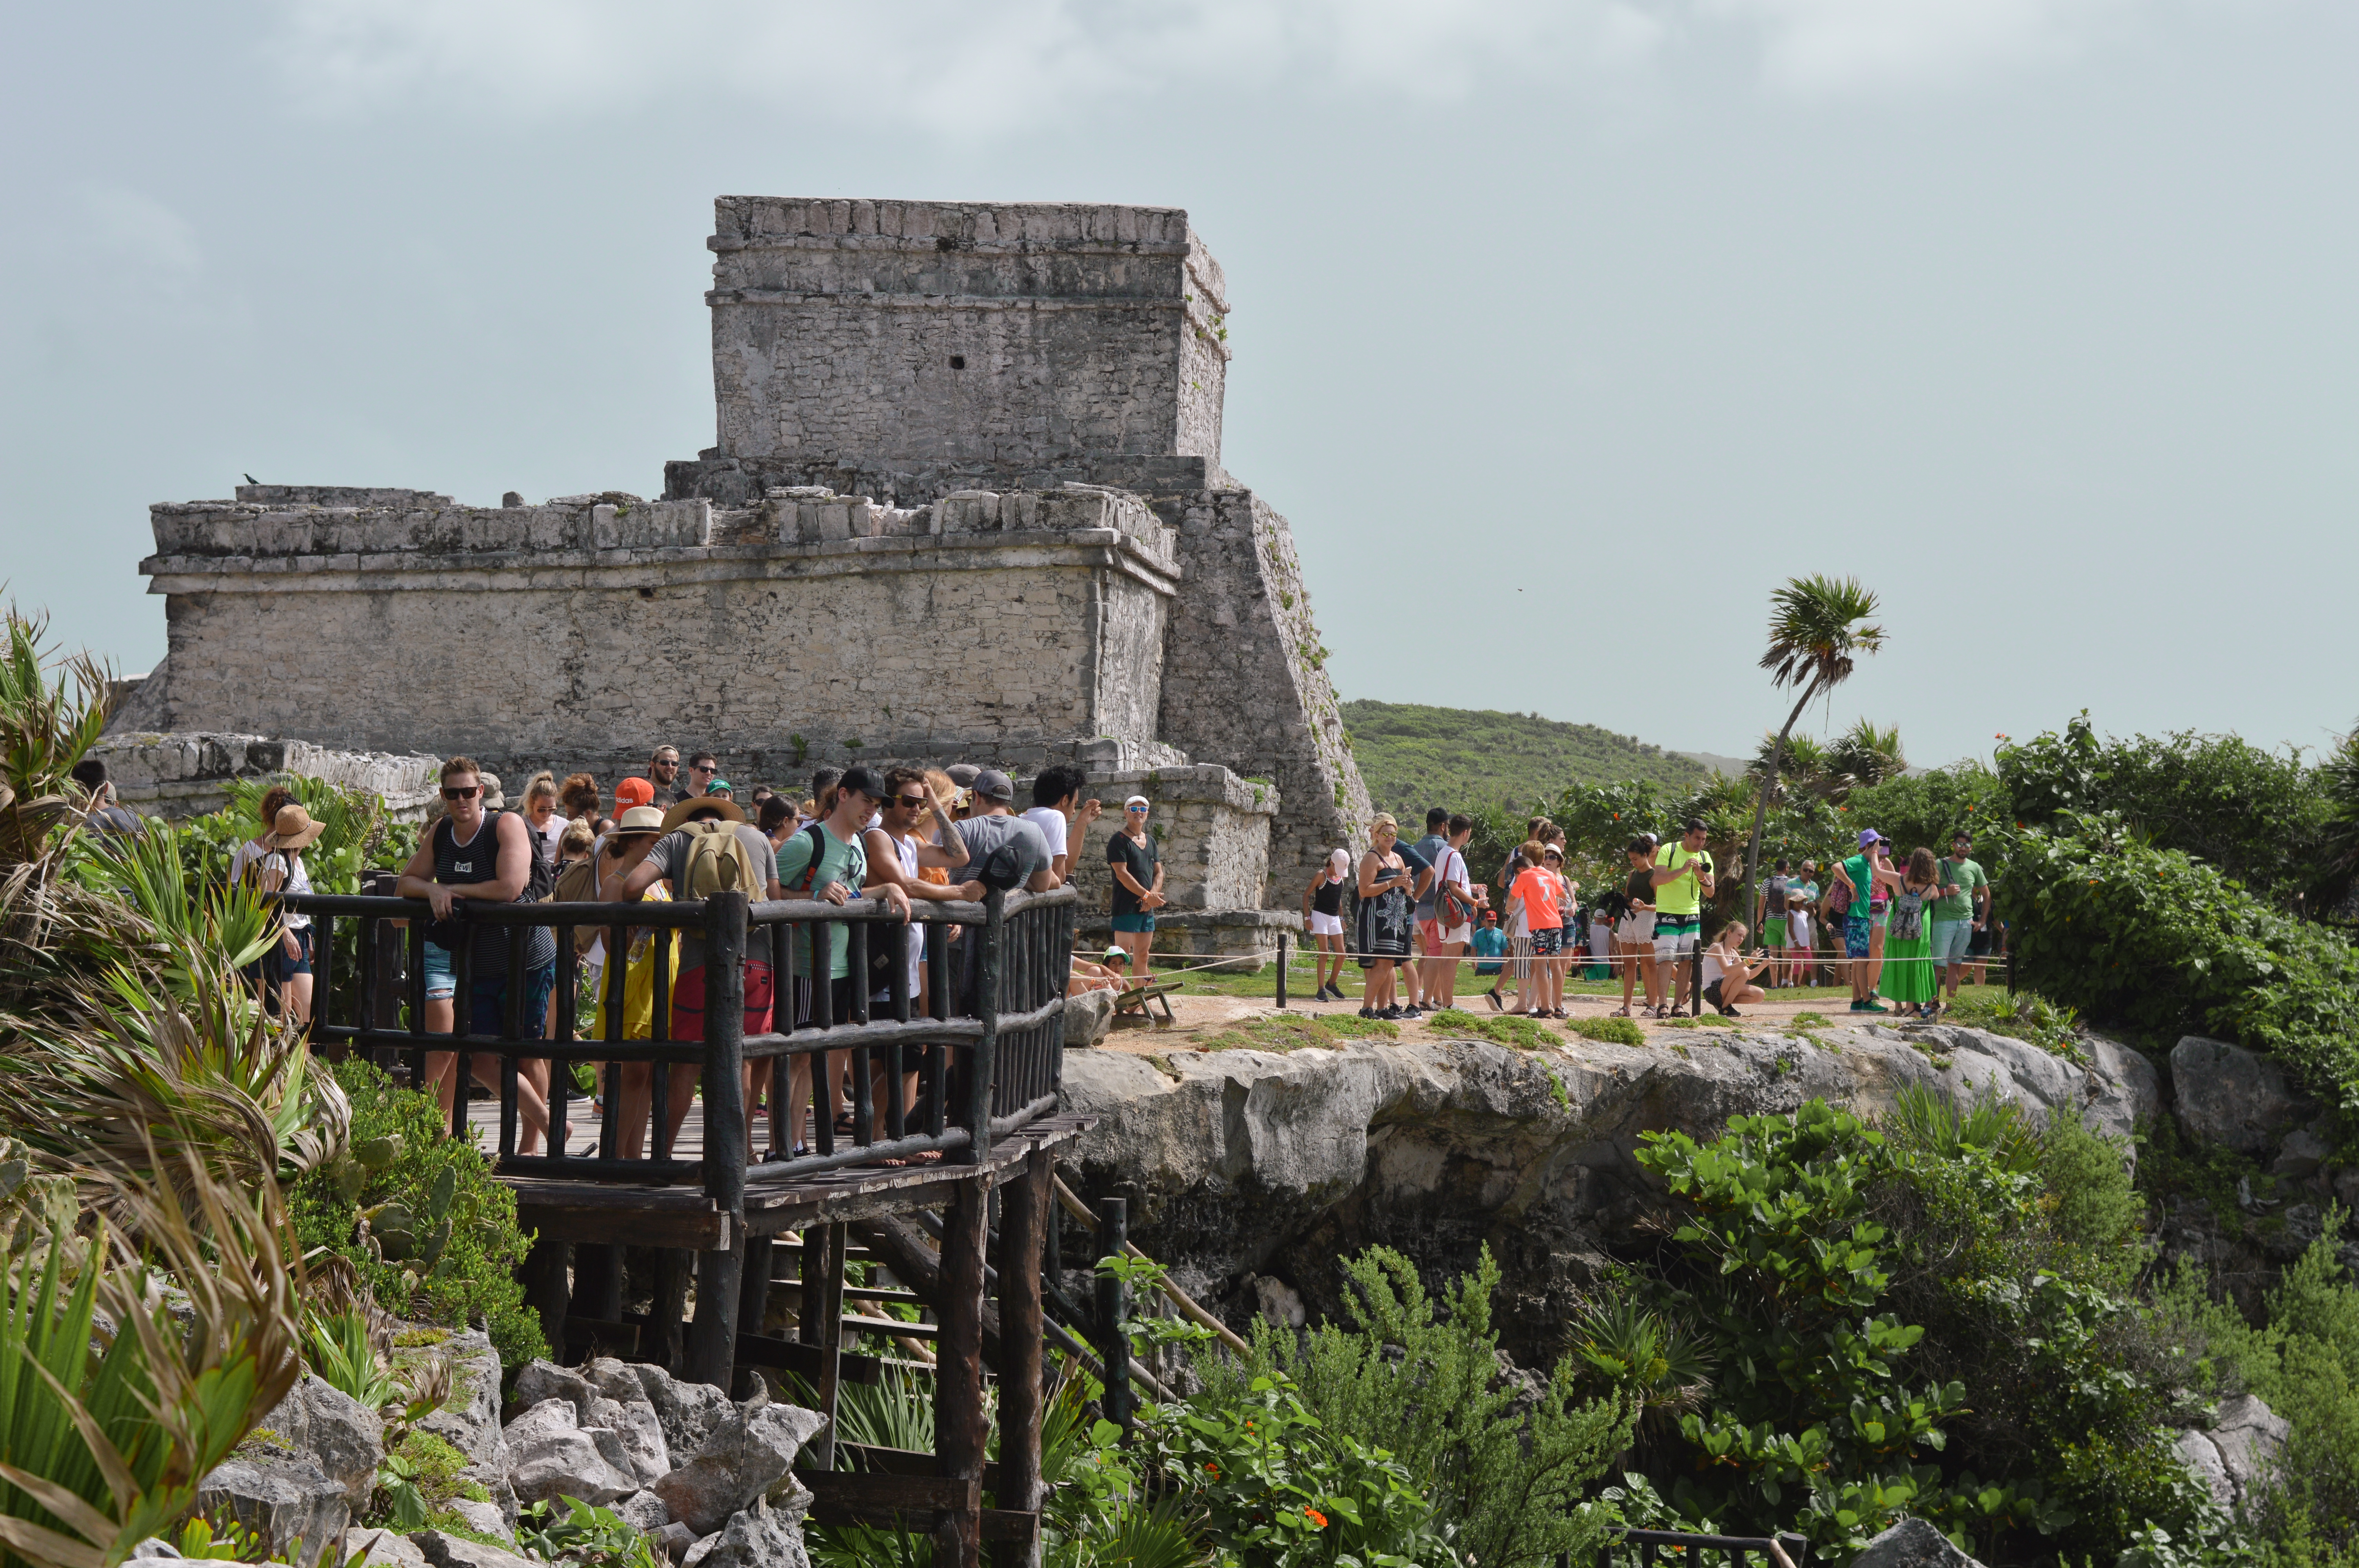 large crowds at the Tulum ruins in Tulum, Mexico